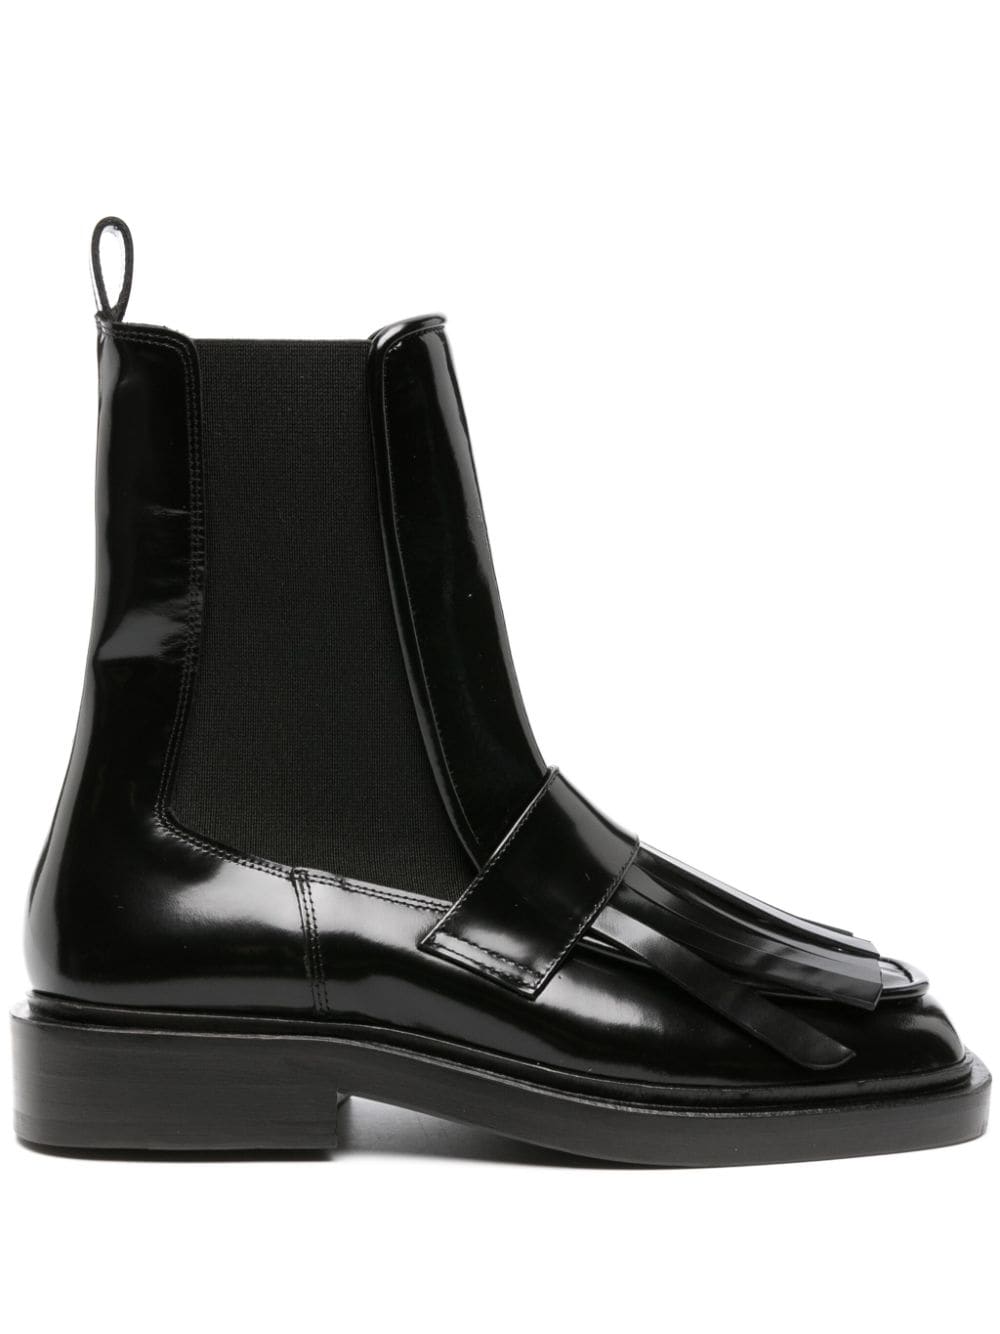 Wandler Lucy leather Chelsea boots - Black von Wandler